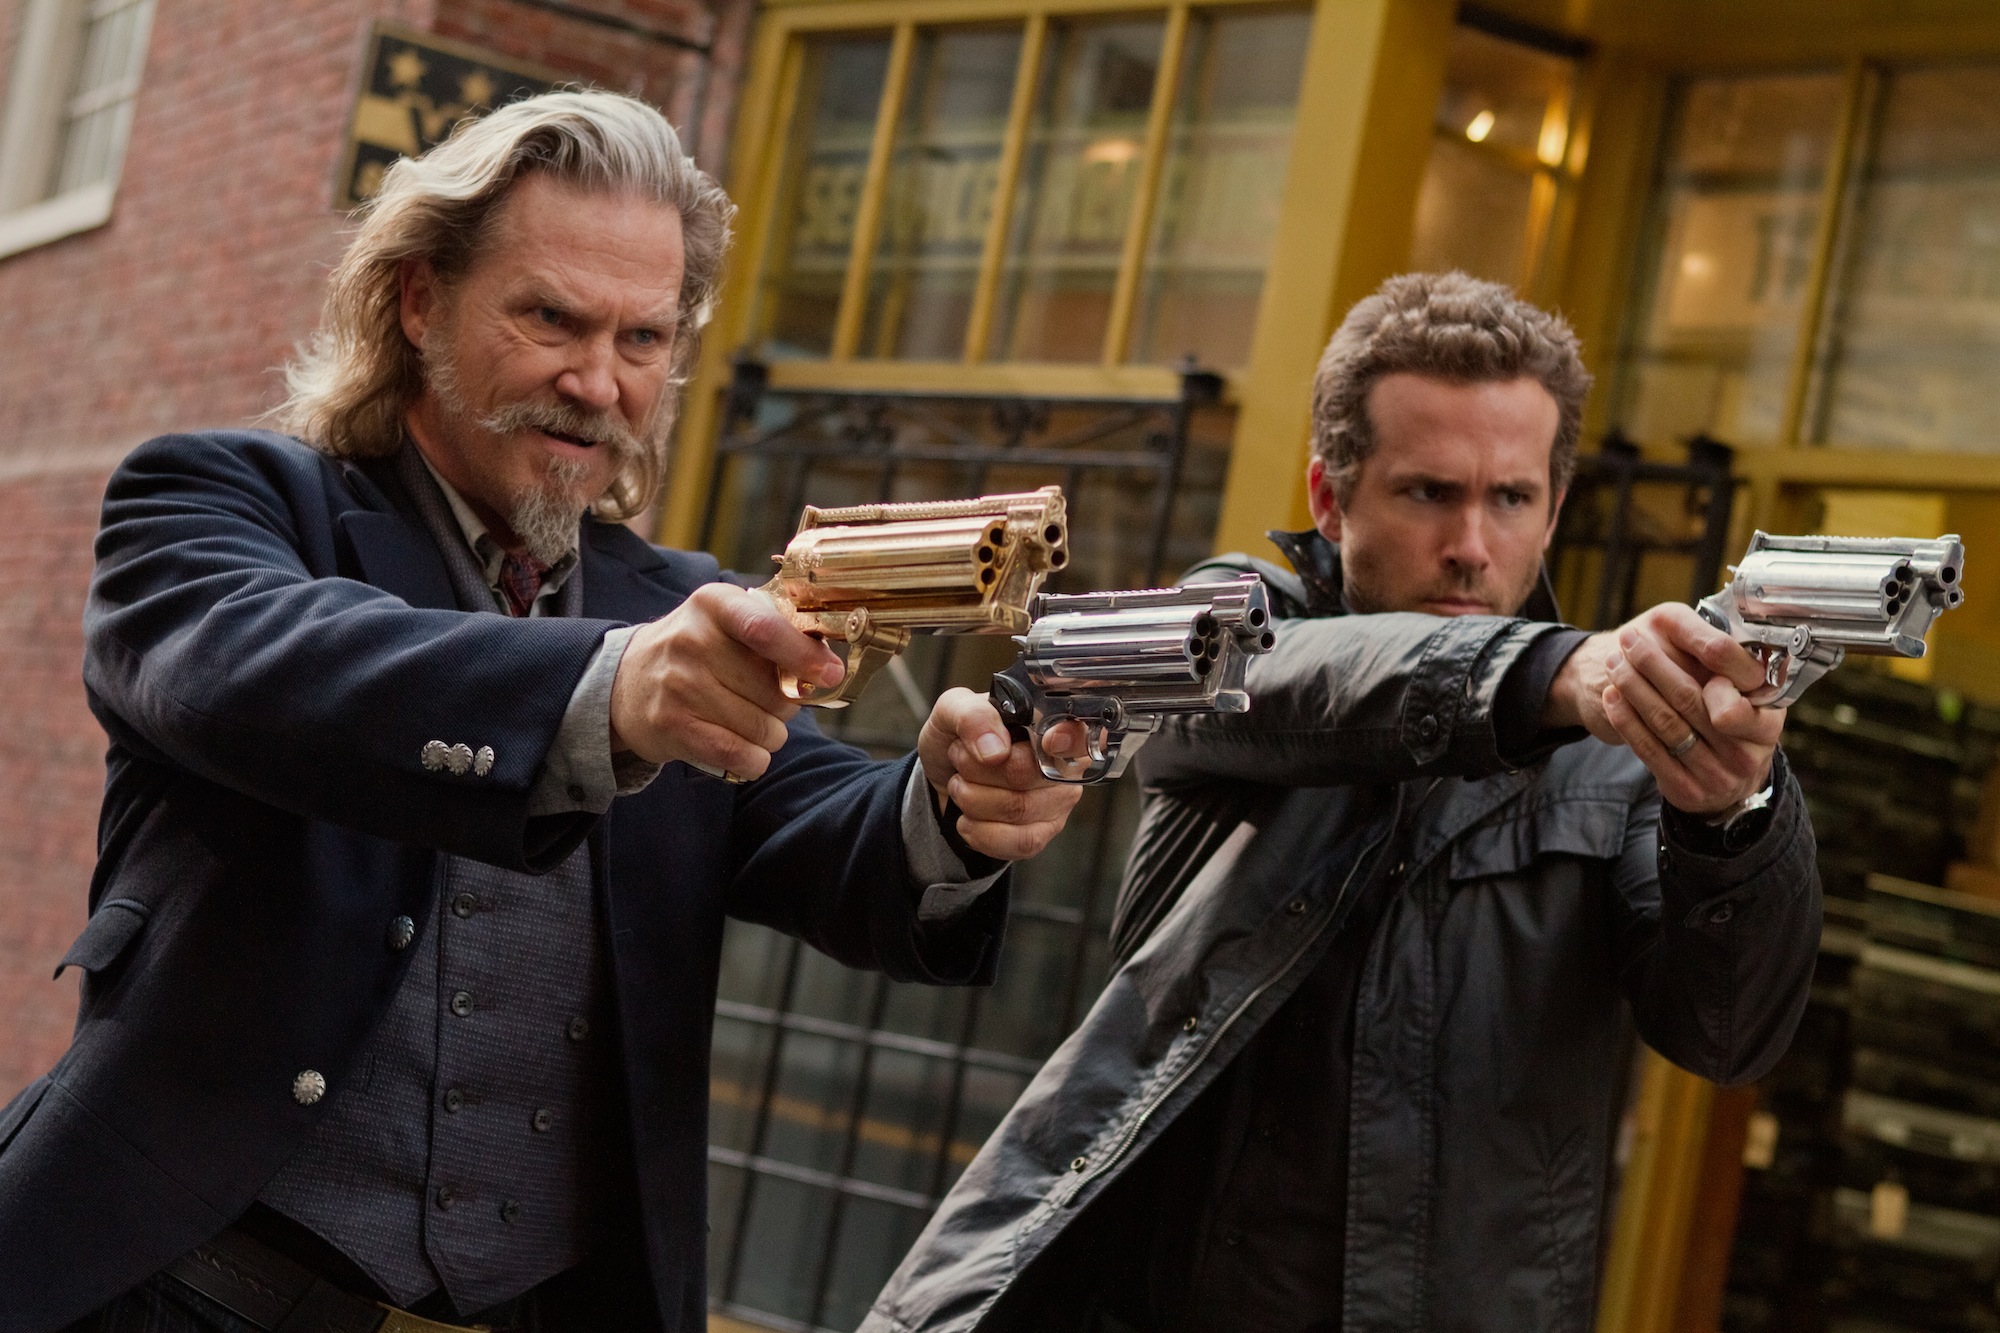 ‘R.I.P.D’ – 3 questions with Jeff Bridges and Ryan Reynolds